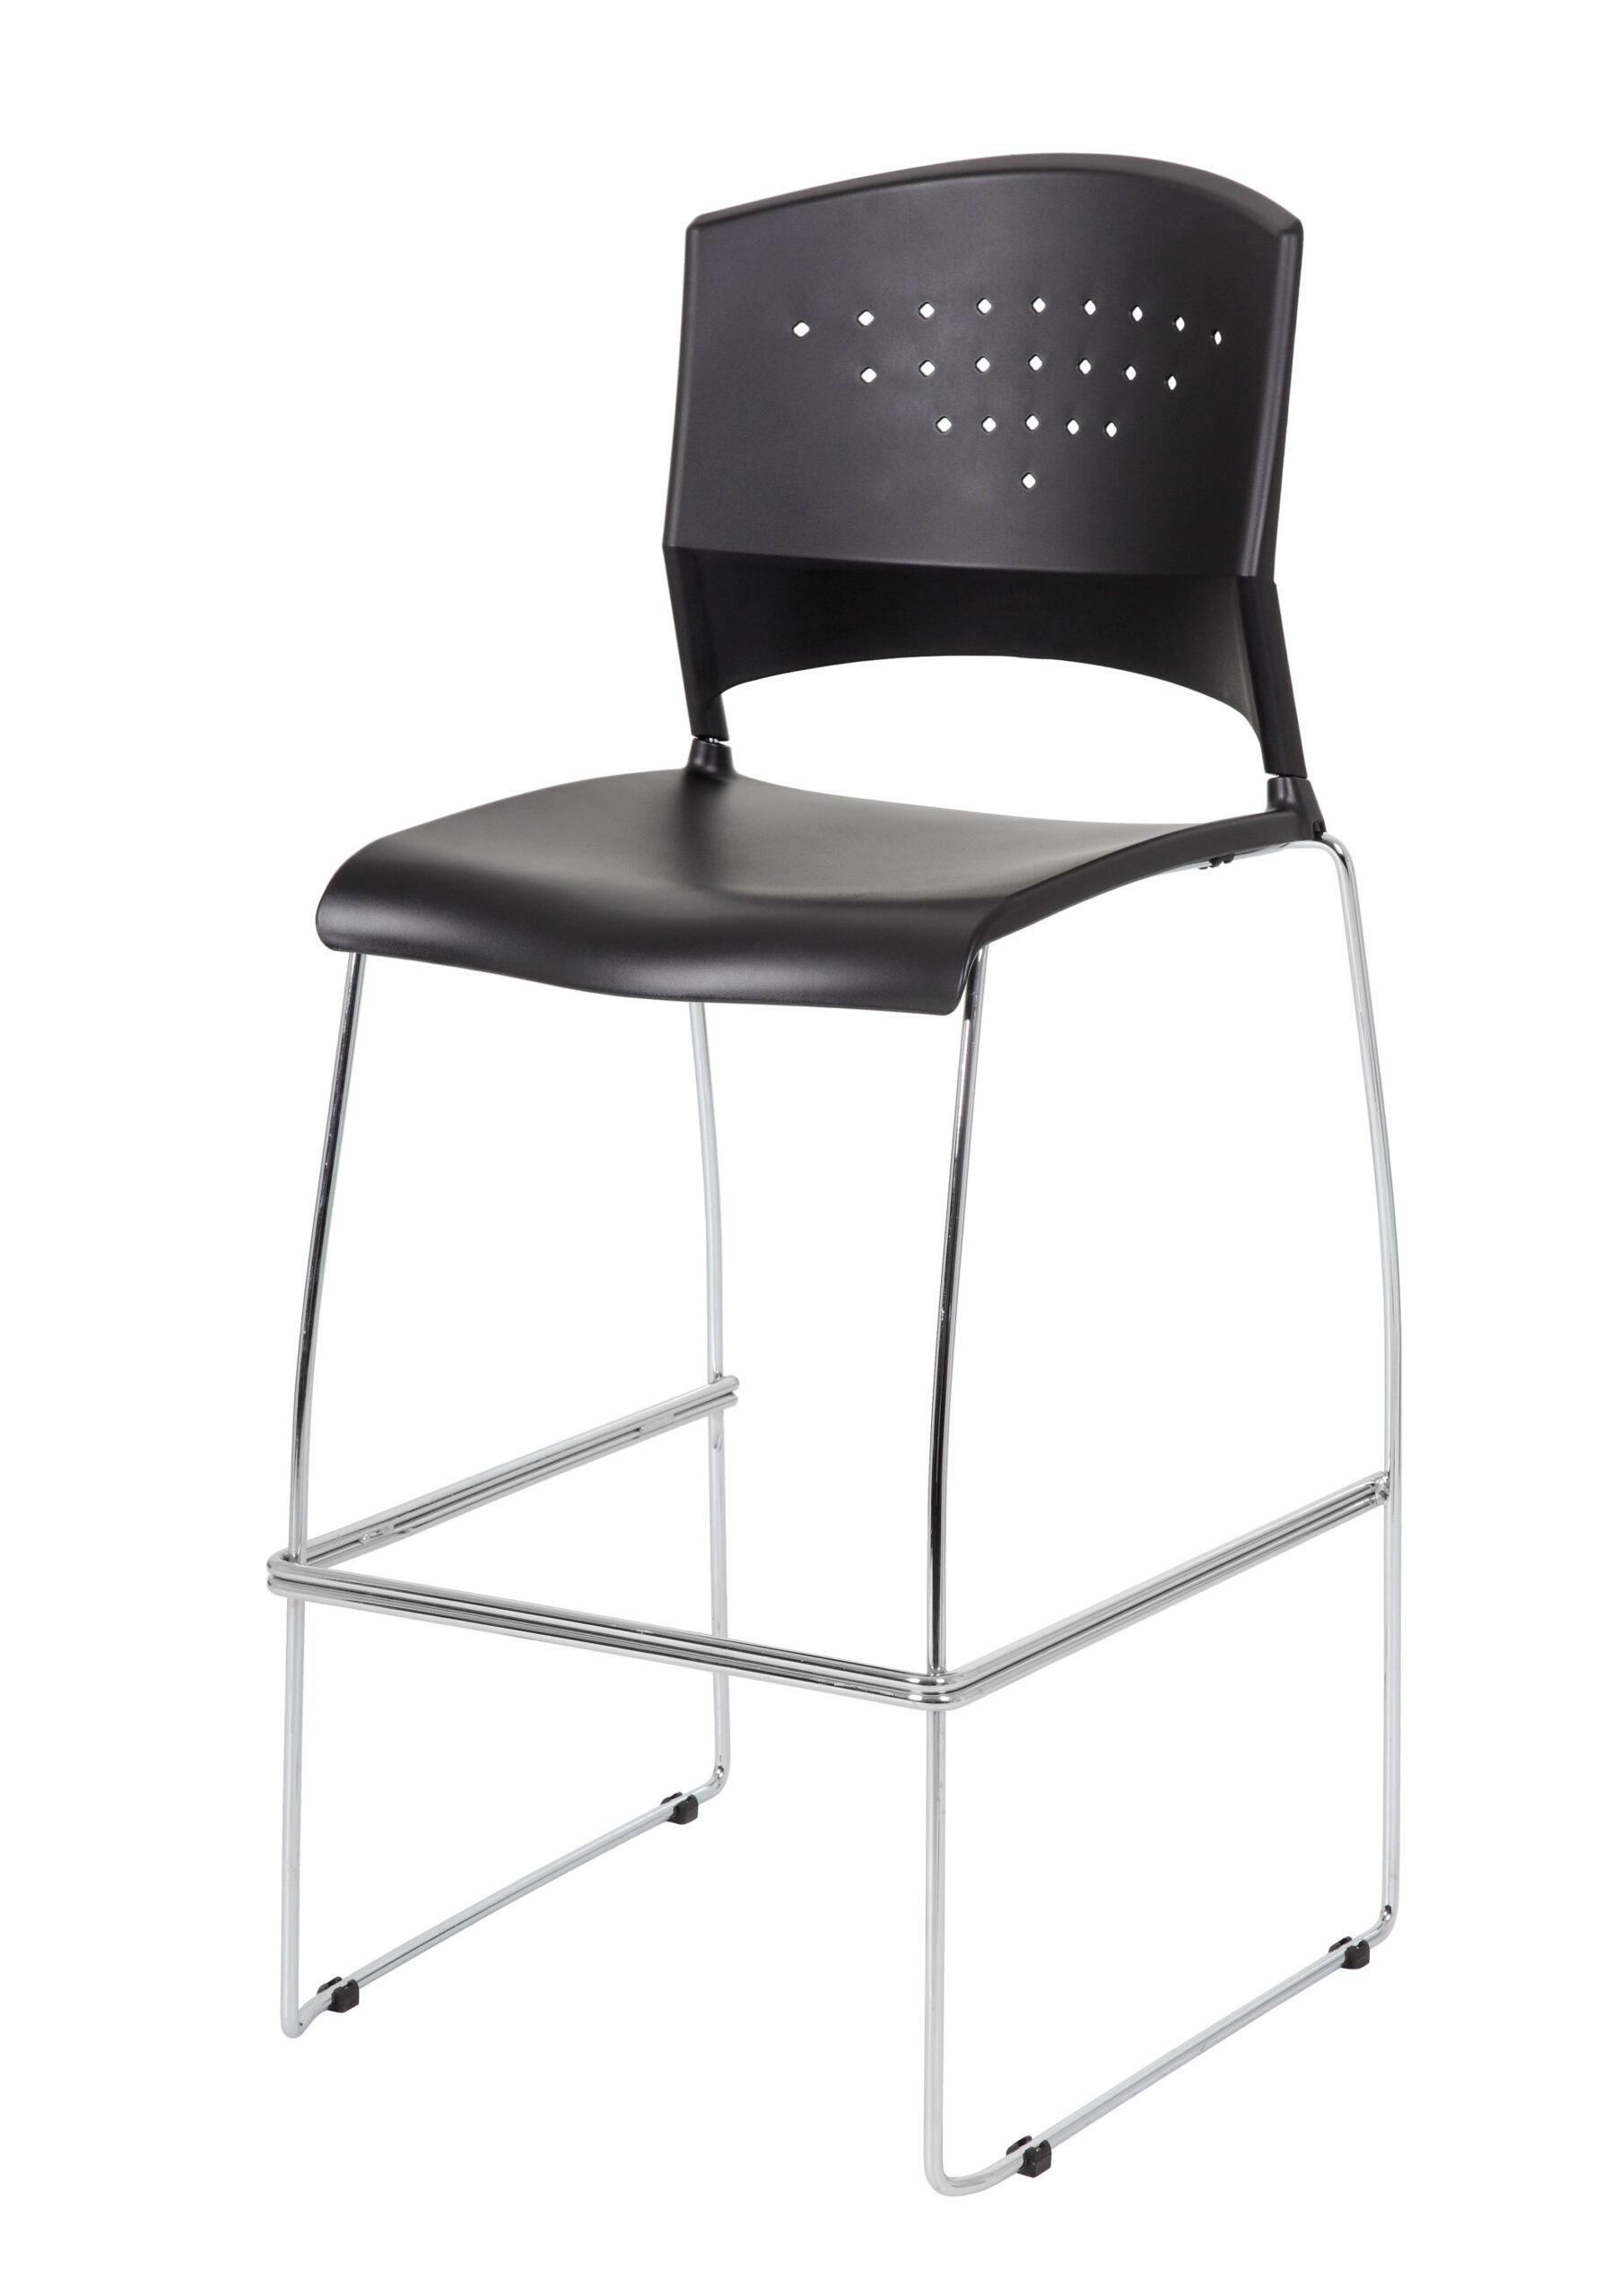 Trends Boss Black Stack Stool Frame (set – BossChair With of Chrome 2)